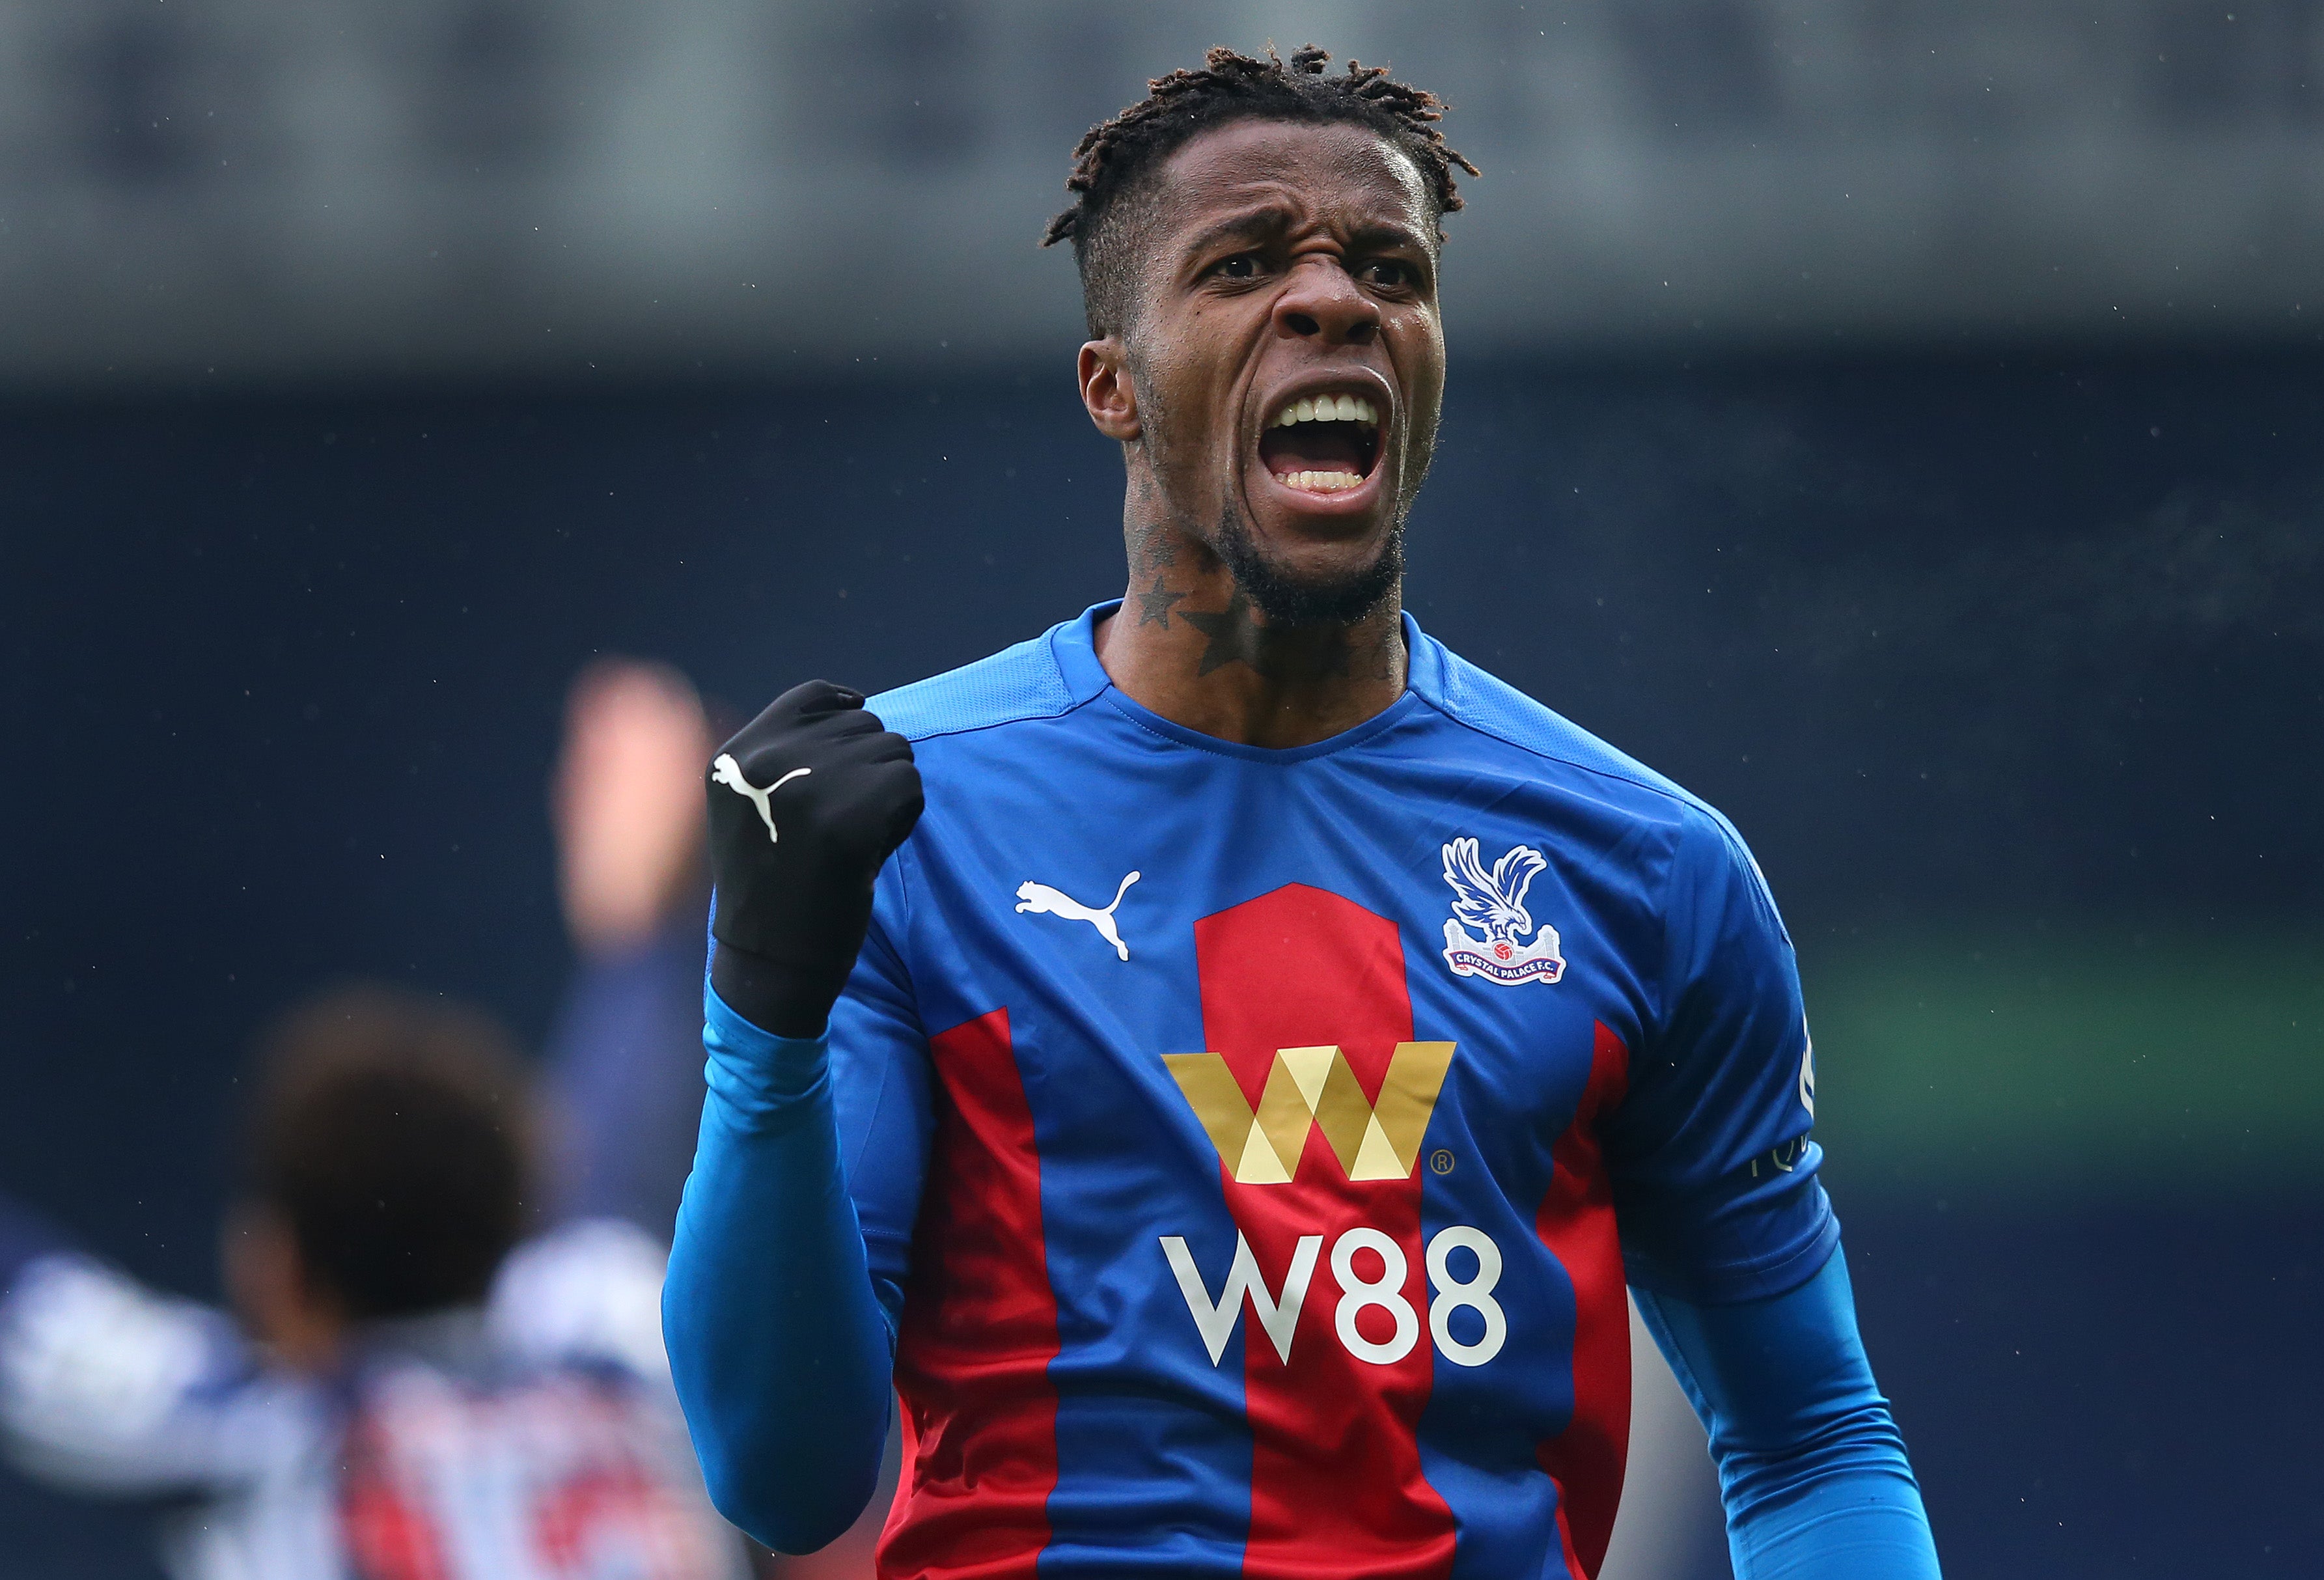 Wilfried Zaha will be featured in the series